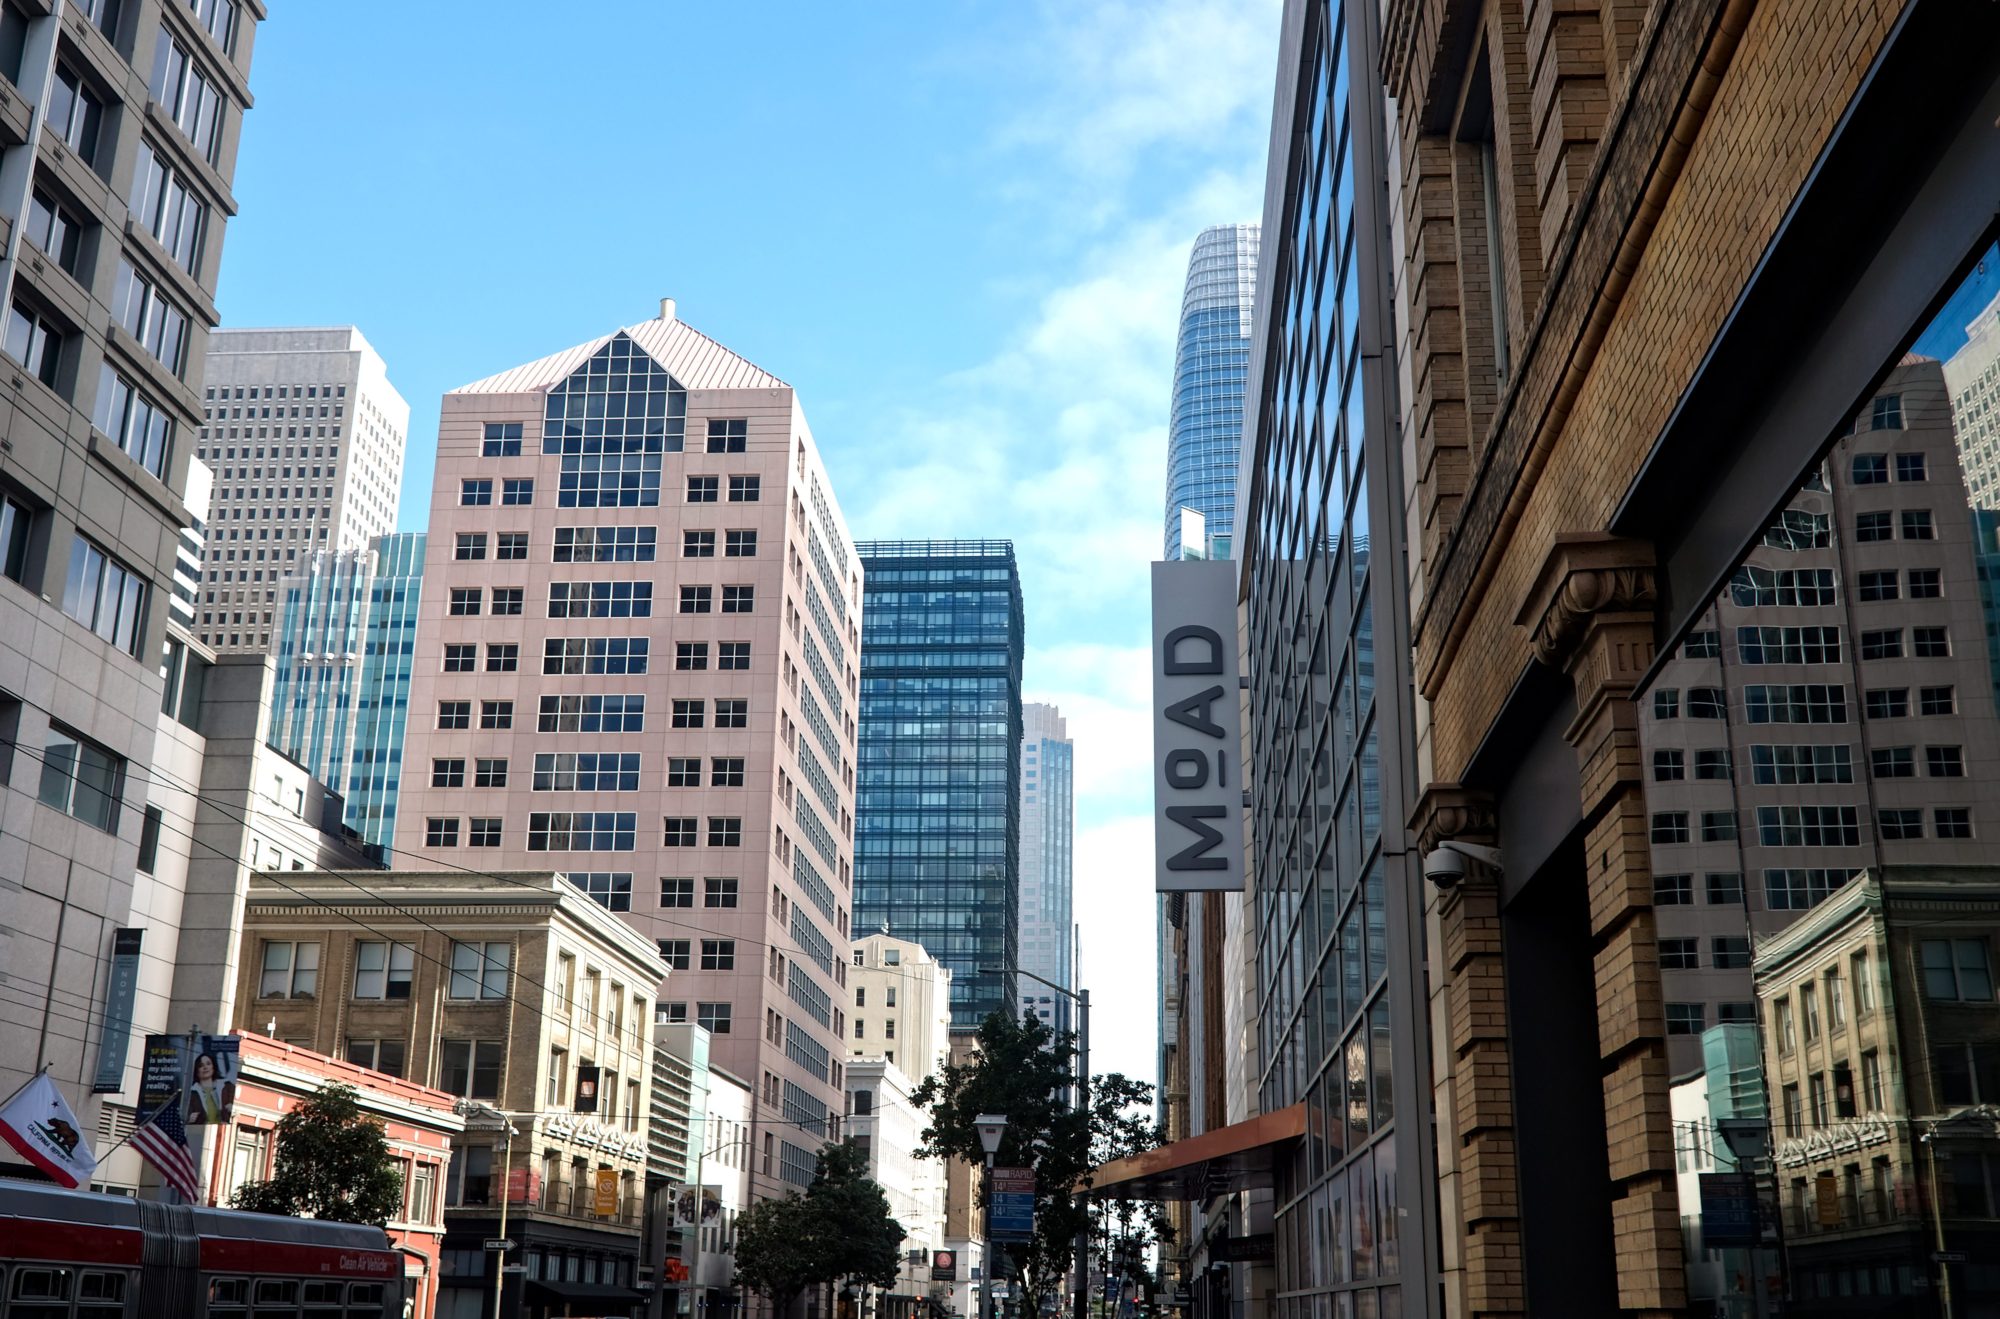 A street in downtown San Francisco